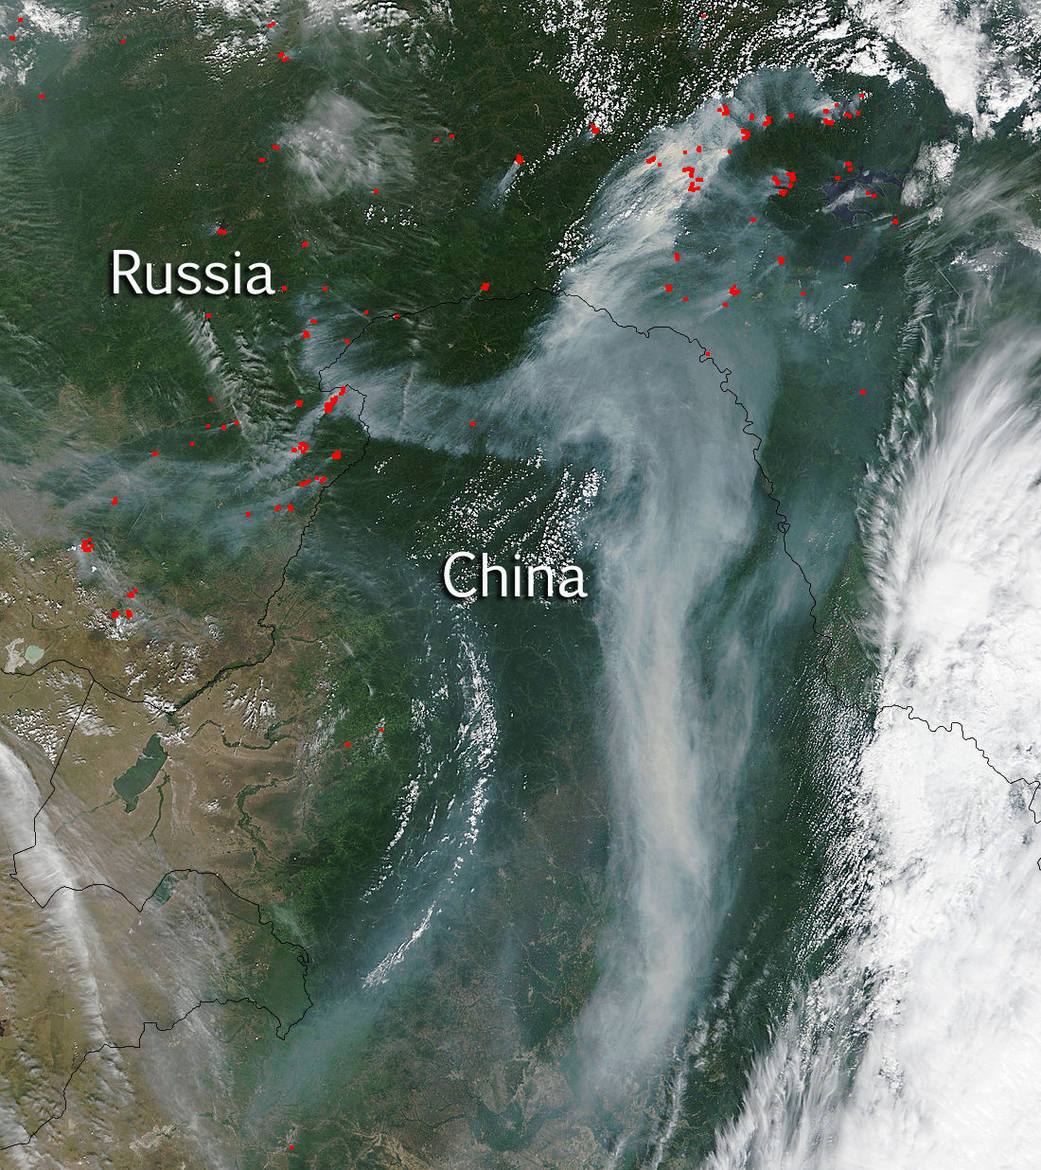 Smoke and fires in east Asia